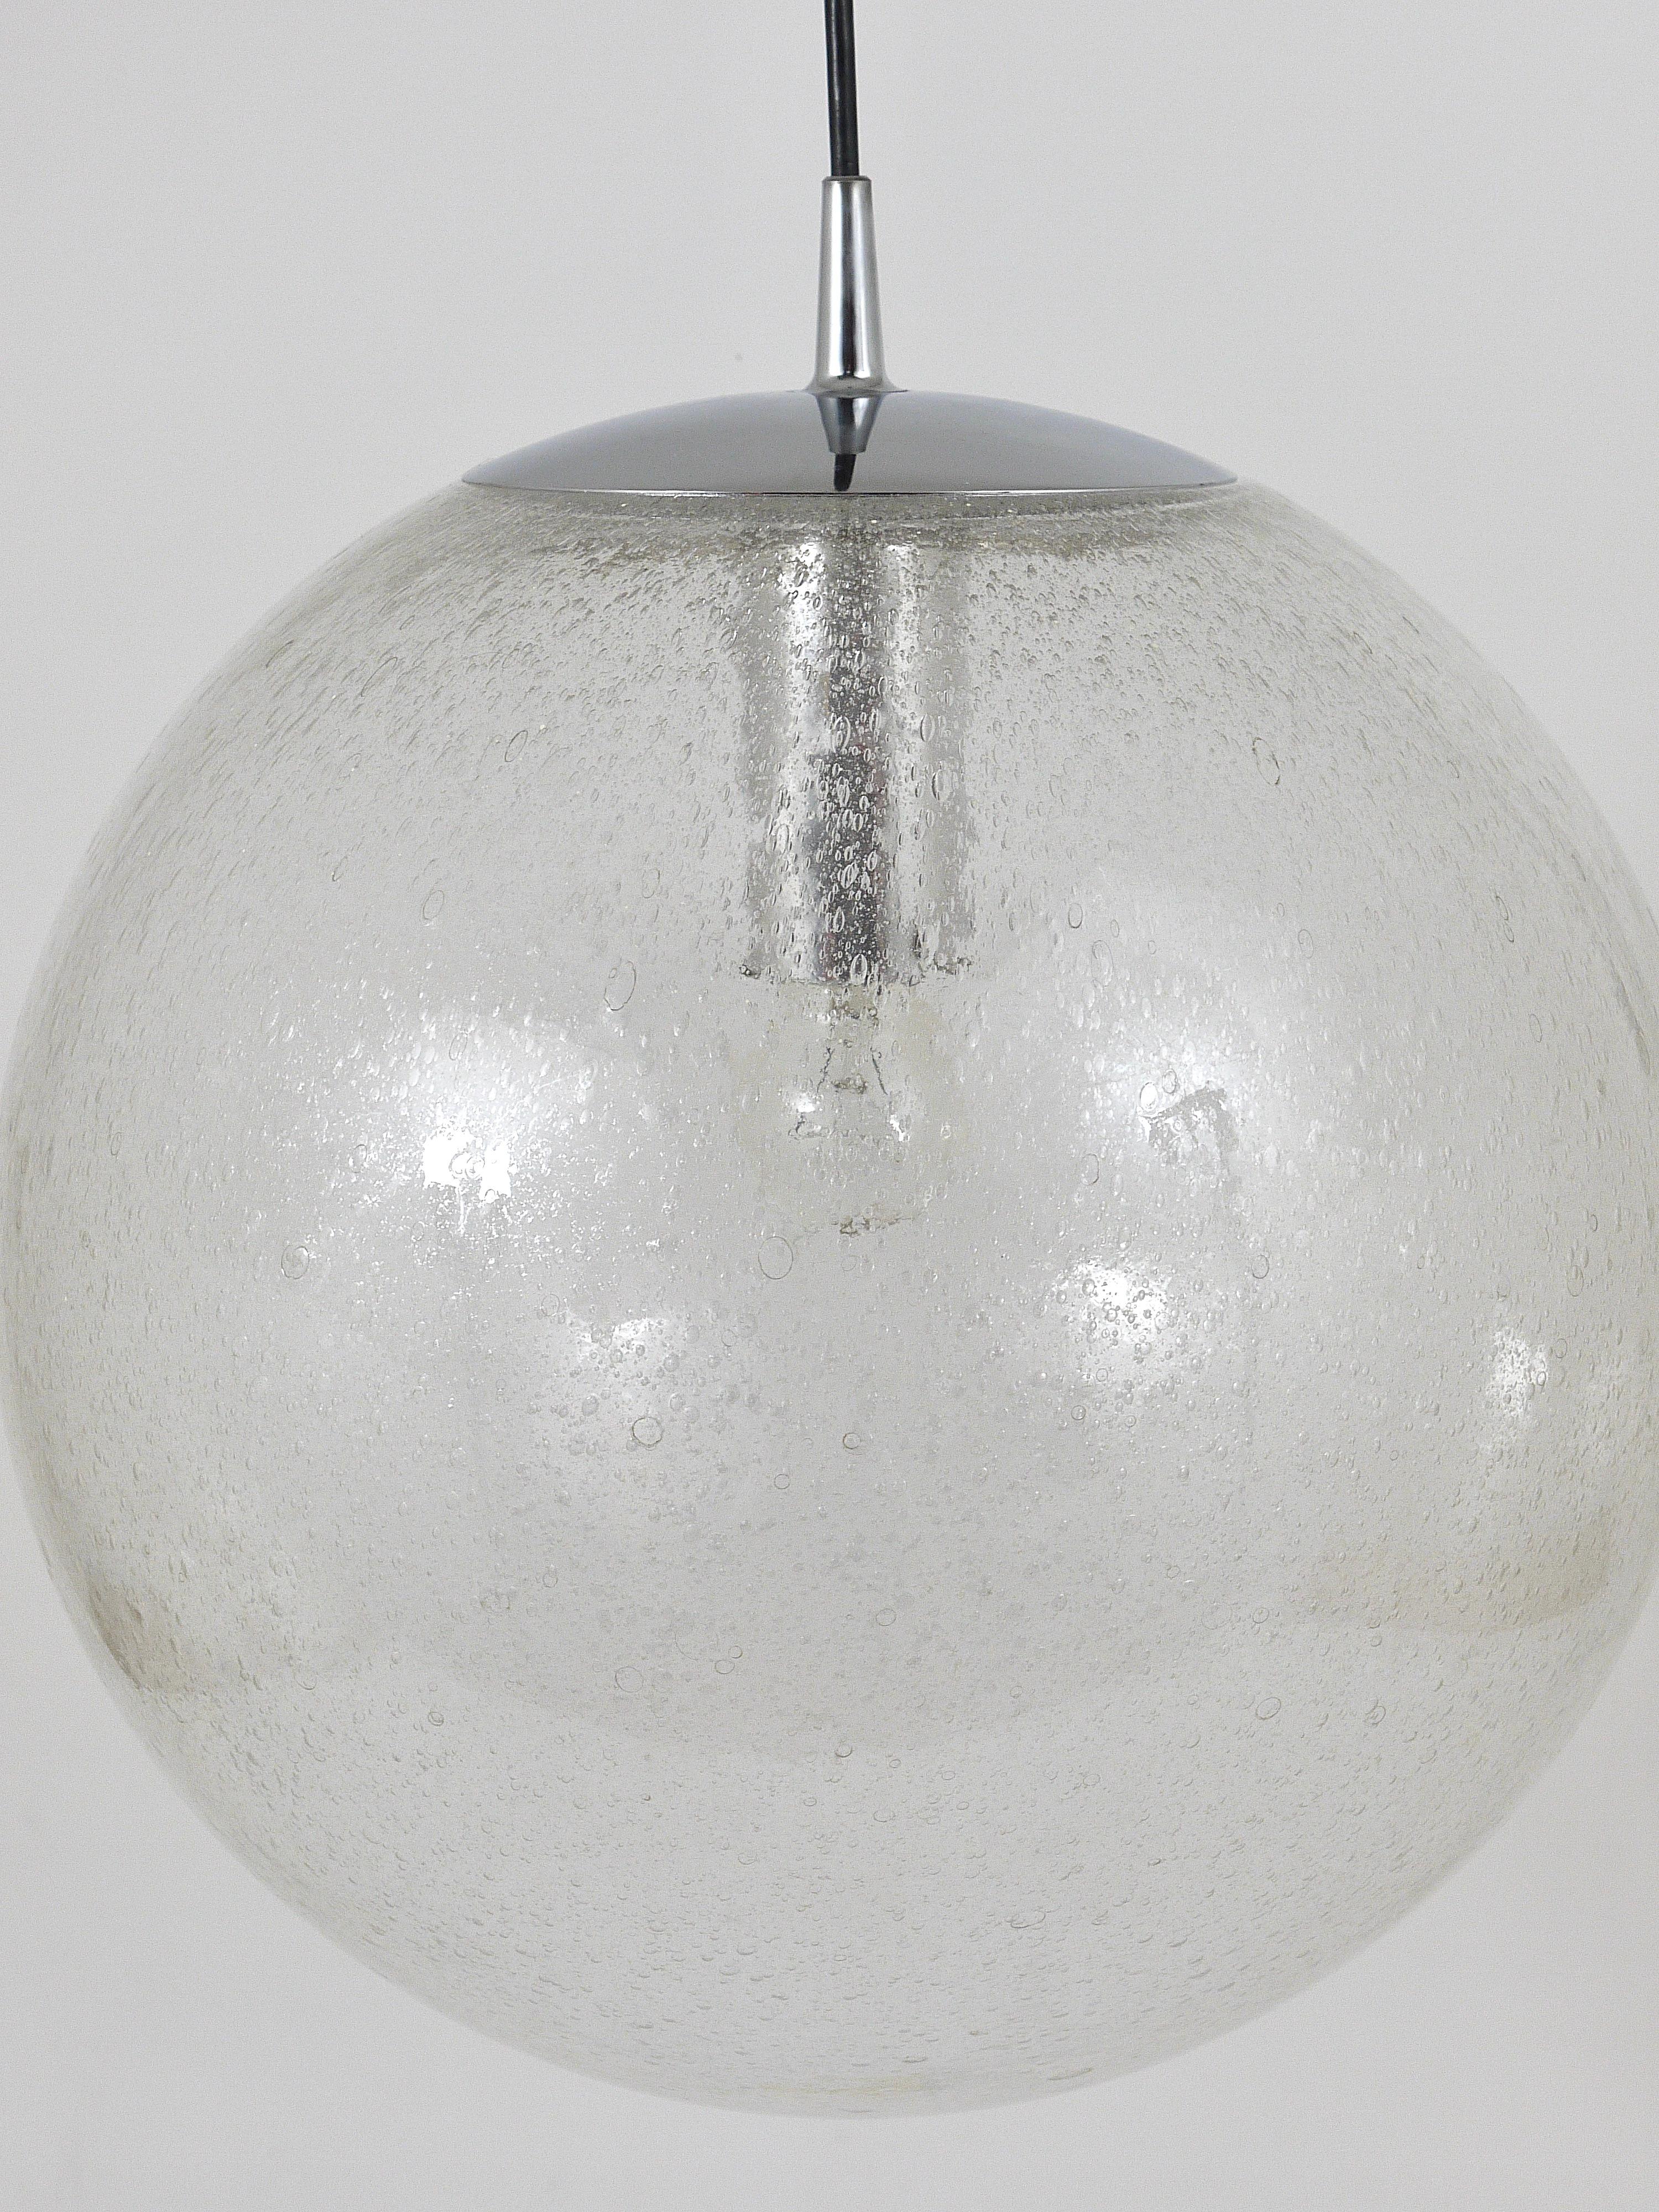 Large Peil & Putzler Bubble Glass and Chrome Globe Pendant Lamp, Germany, 1970s For Sale 6